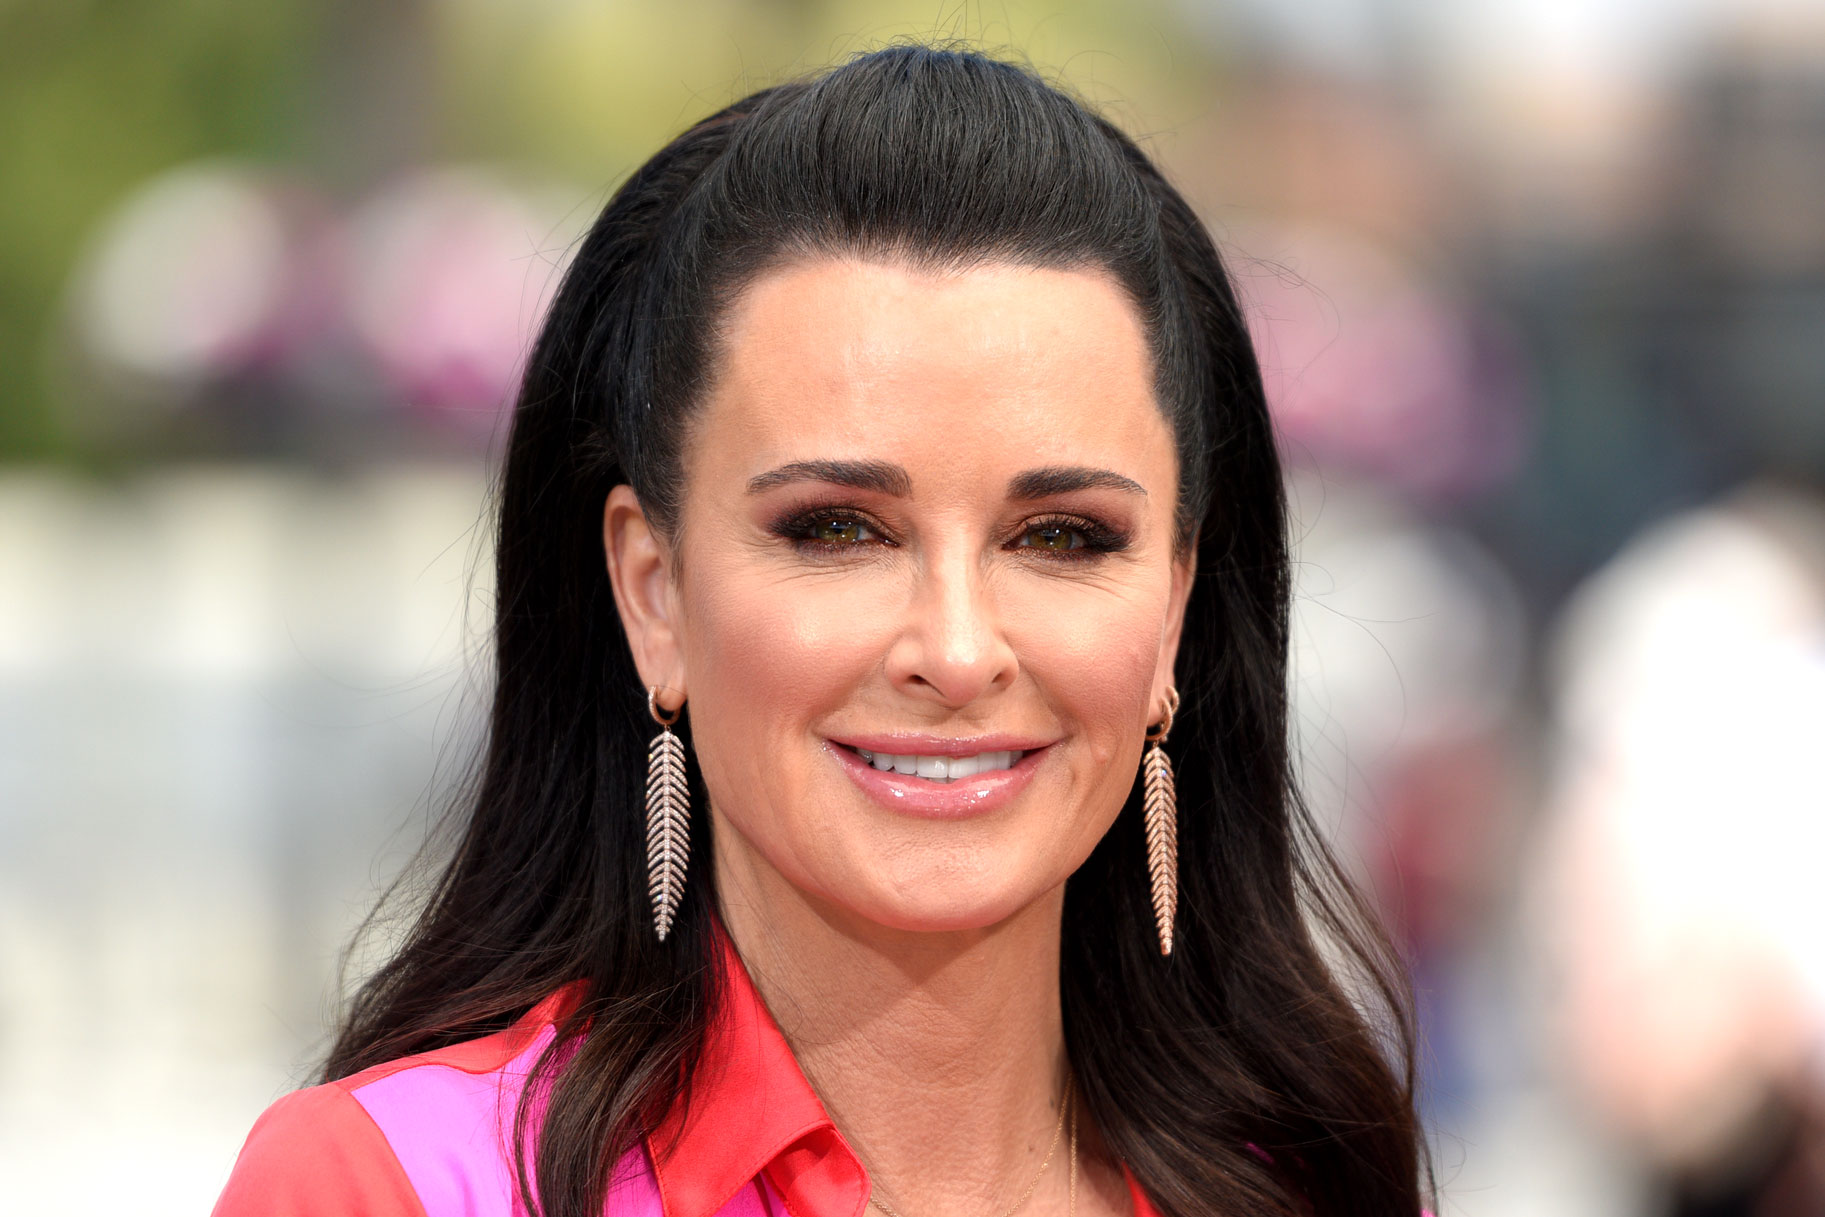 Kyle Richards The Real Housewives of Beverly Hills 8.01 Stronger